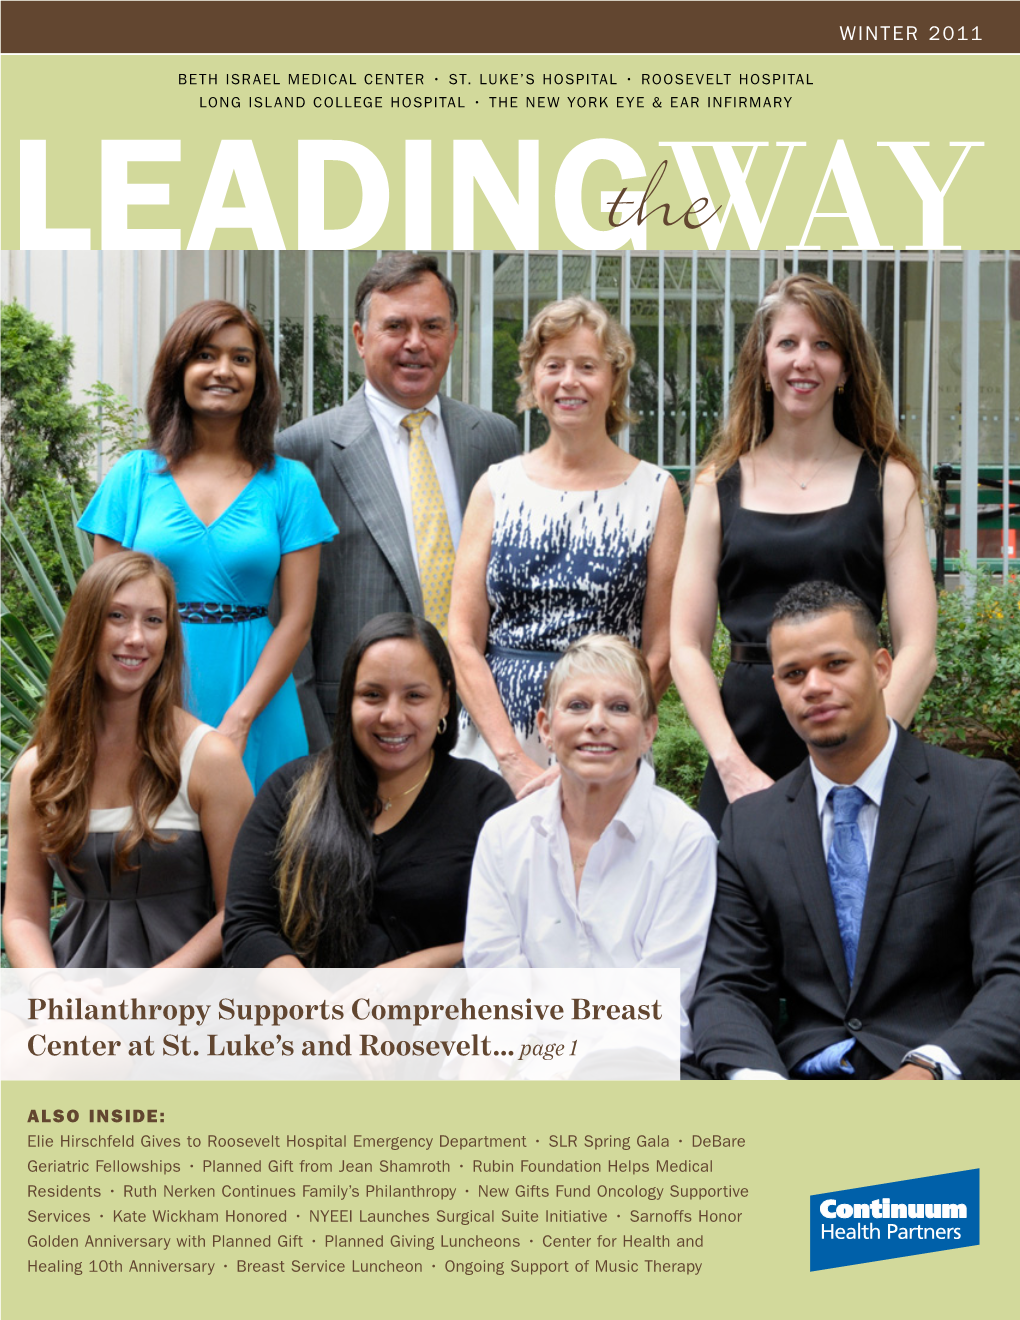 Philanthropy Supports Comprehensive Breast Center at St. Luke's and Roosevelt…Page 1